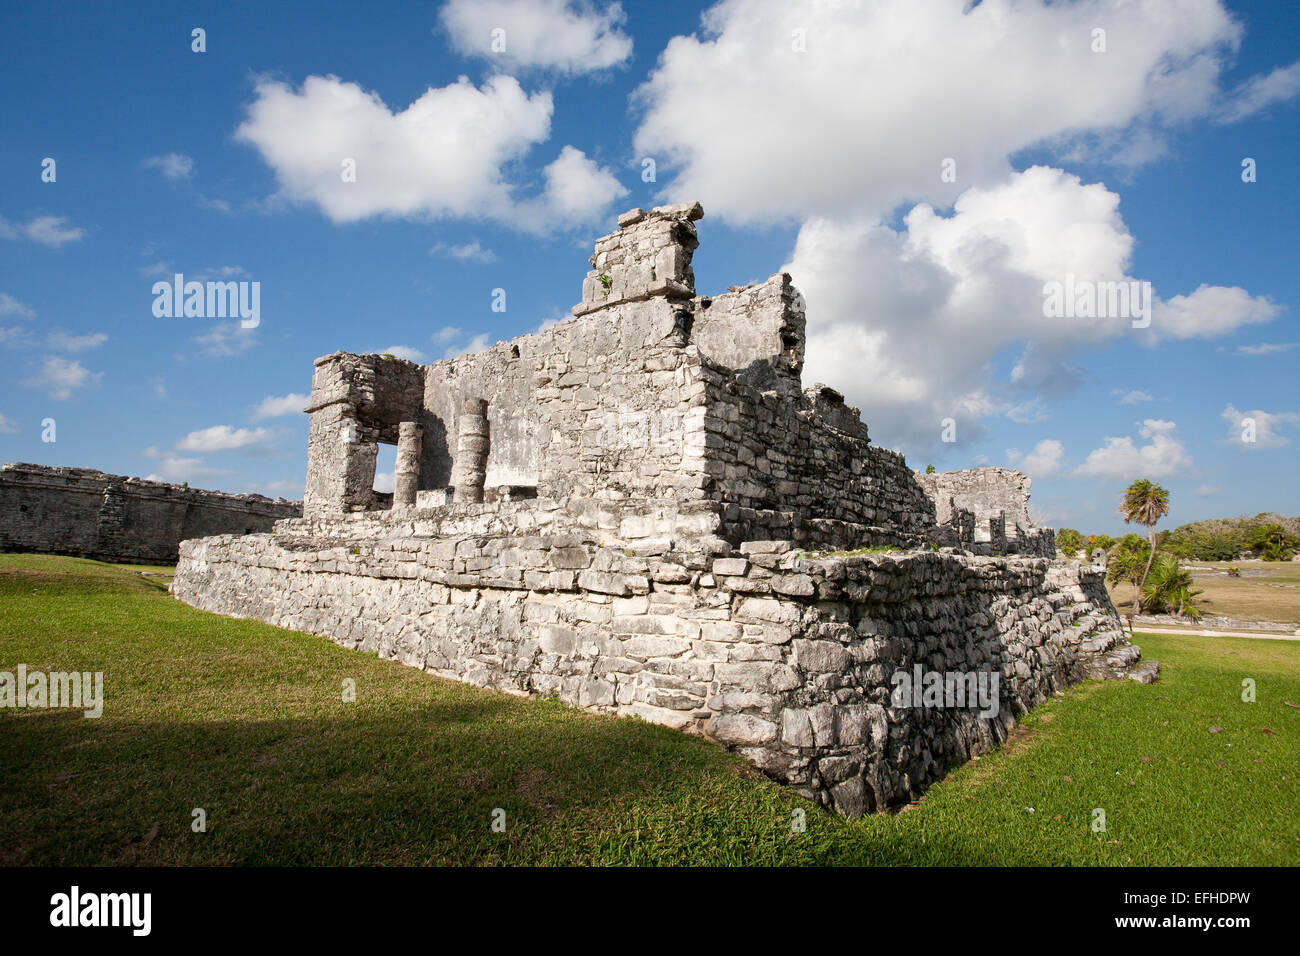 The Great Palace at Tulum ruins. A platform and some surviving columns of the Great Palace at tulum. Stock Photo